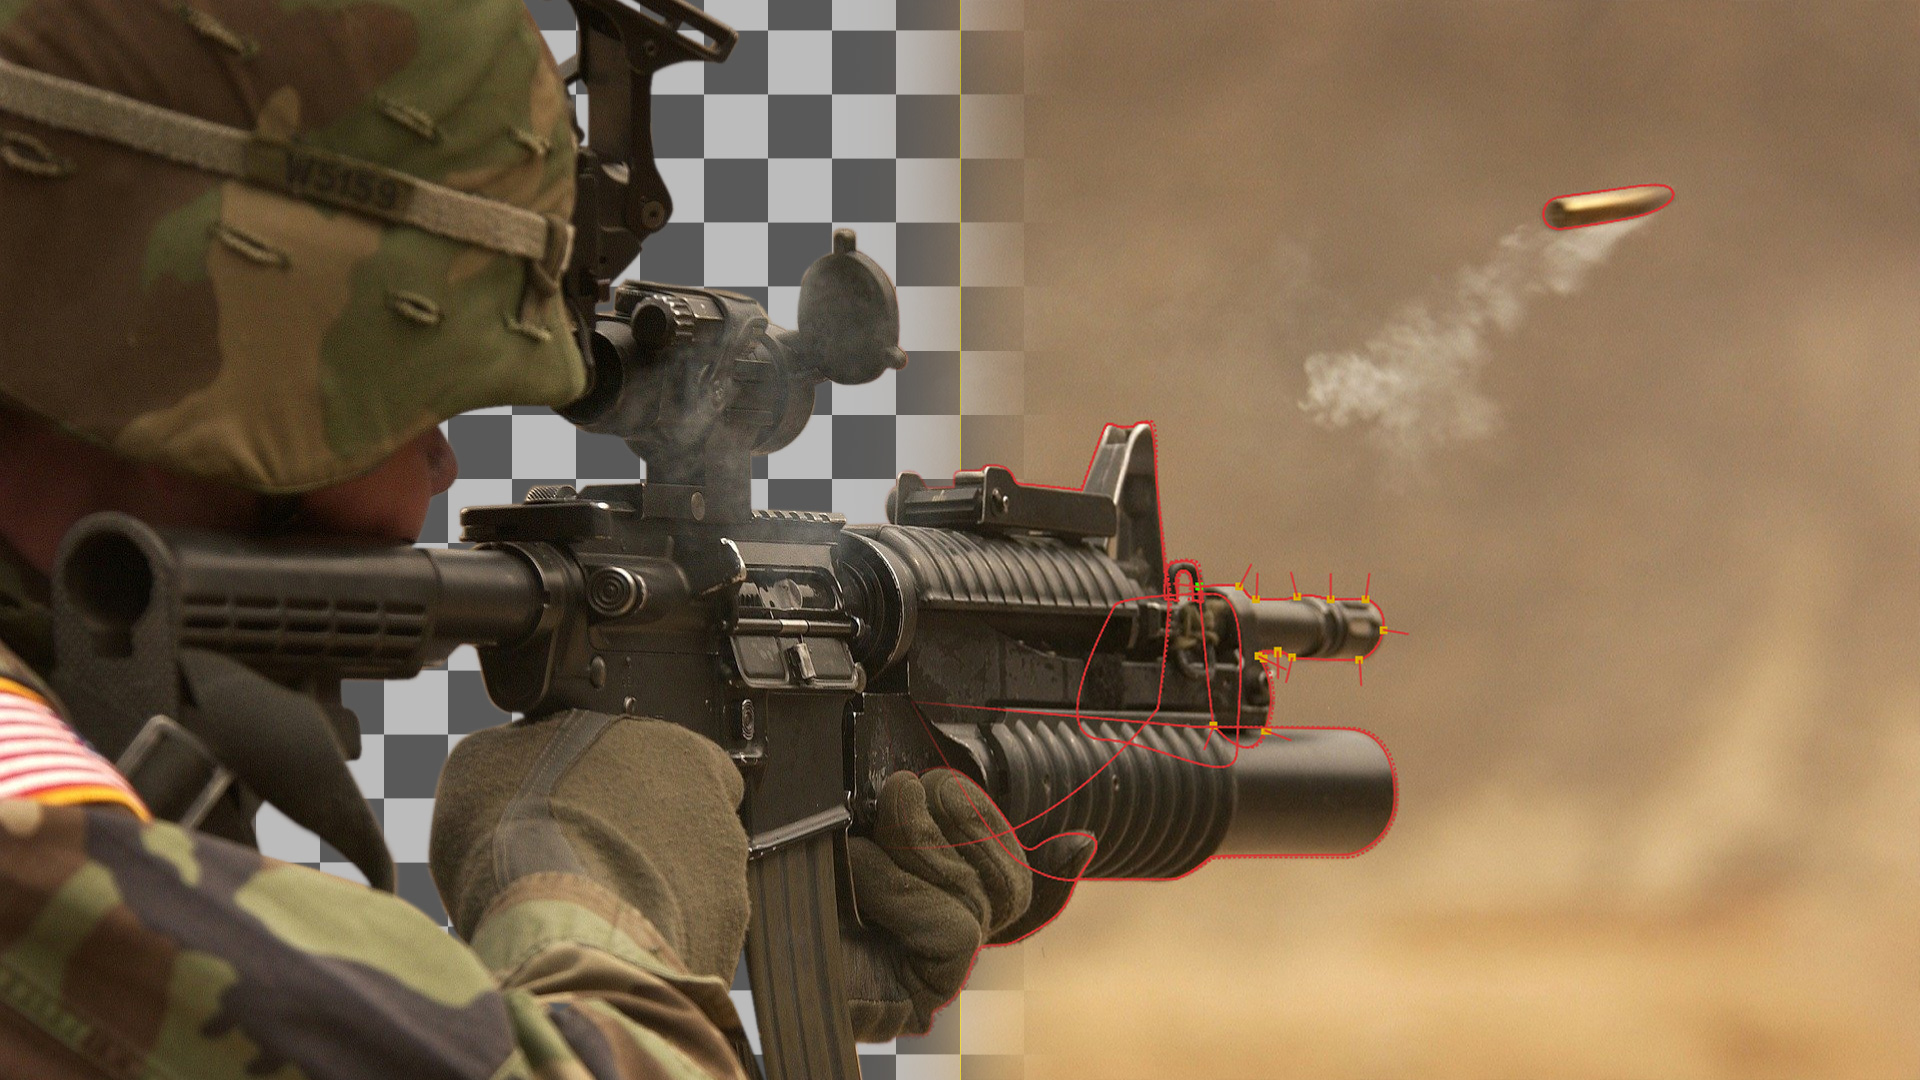 A soldier firing a rifle, in half the image the soldier has been isolated from the background.